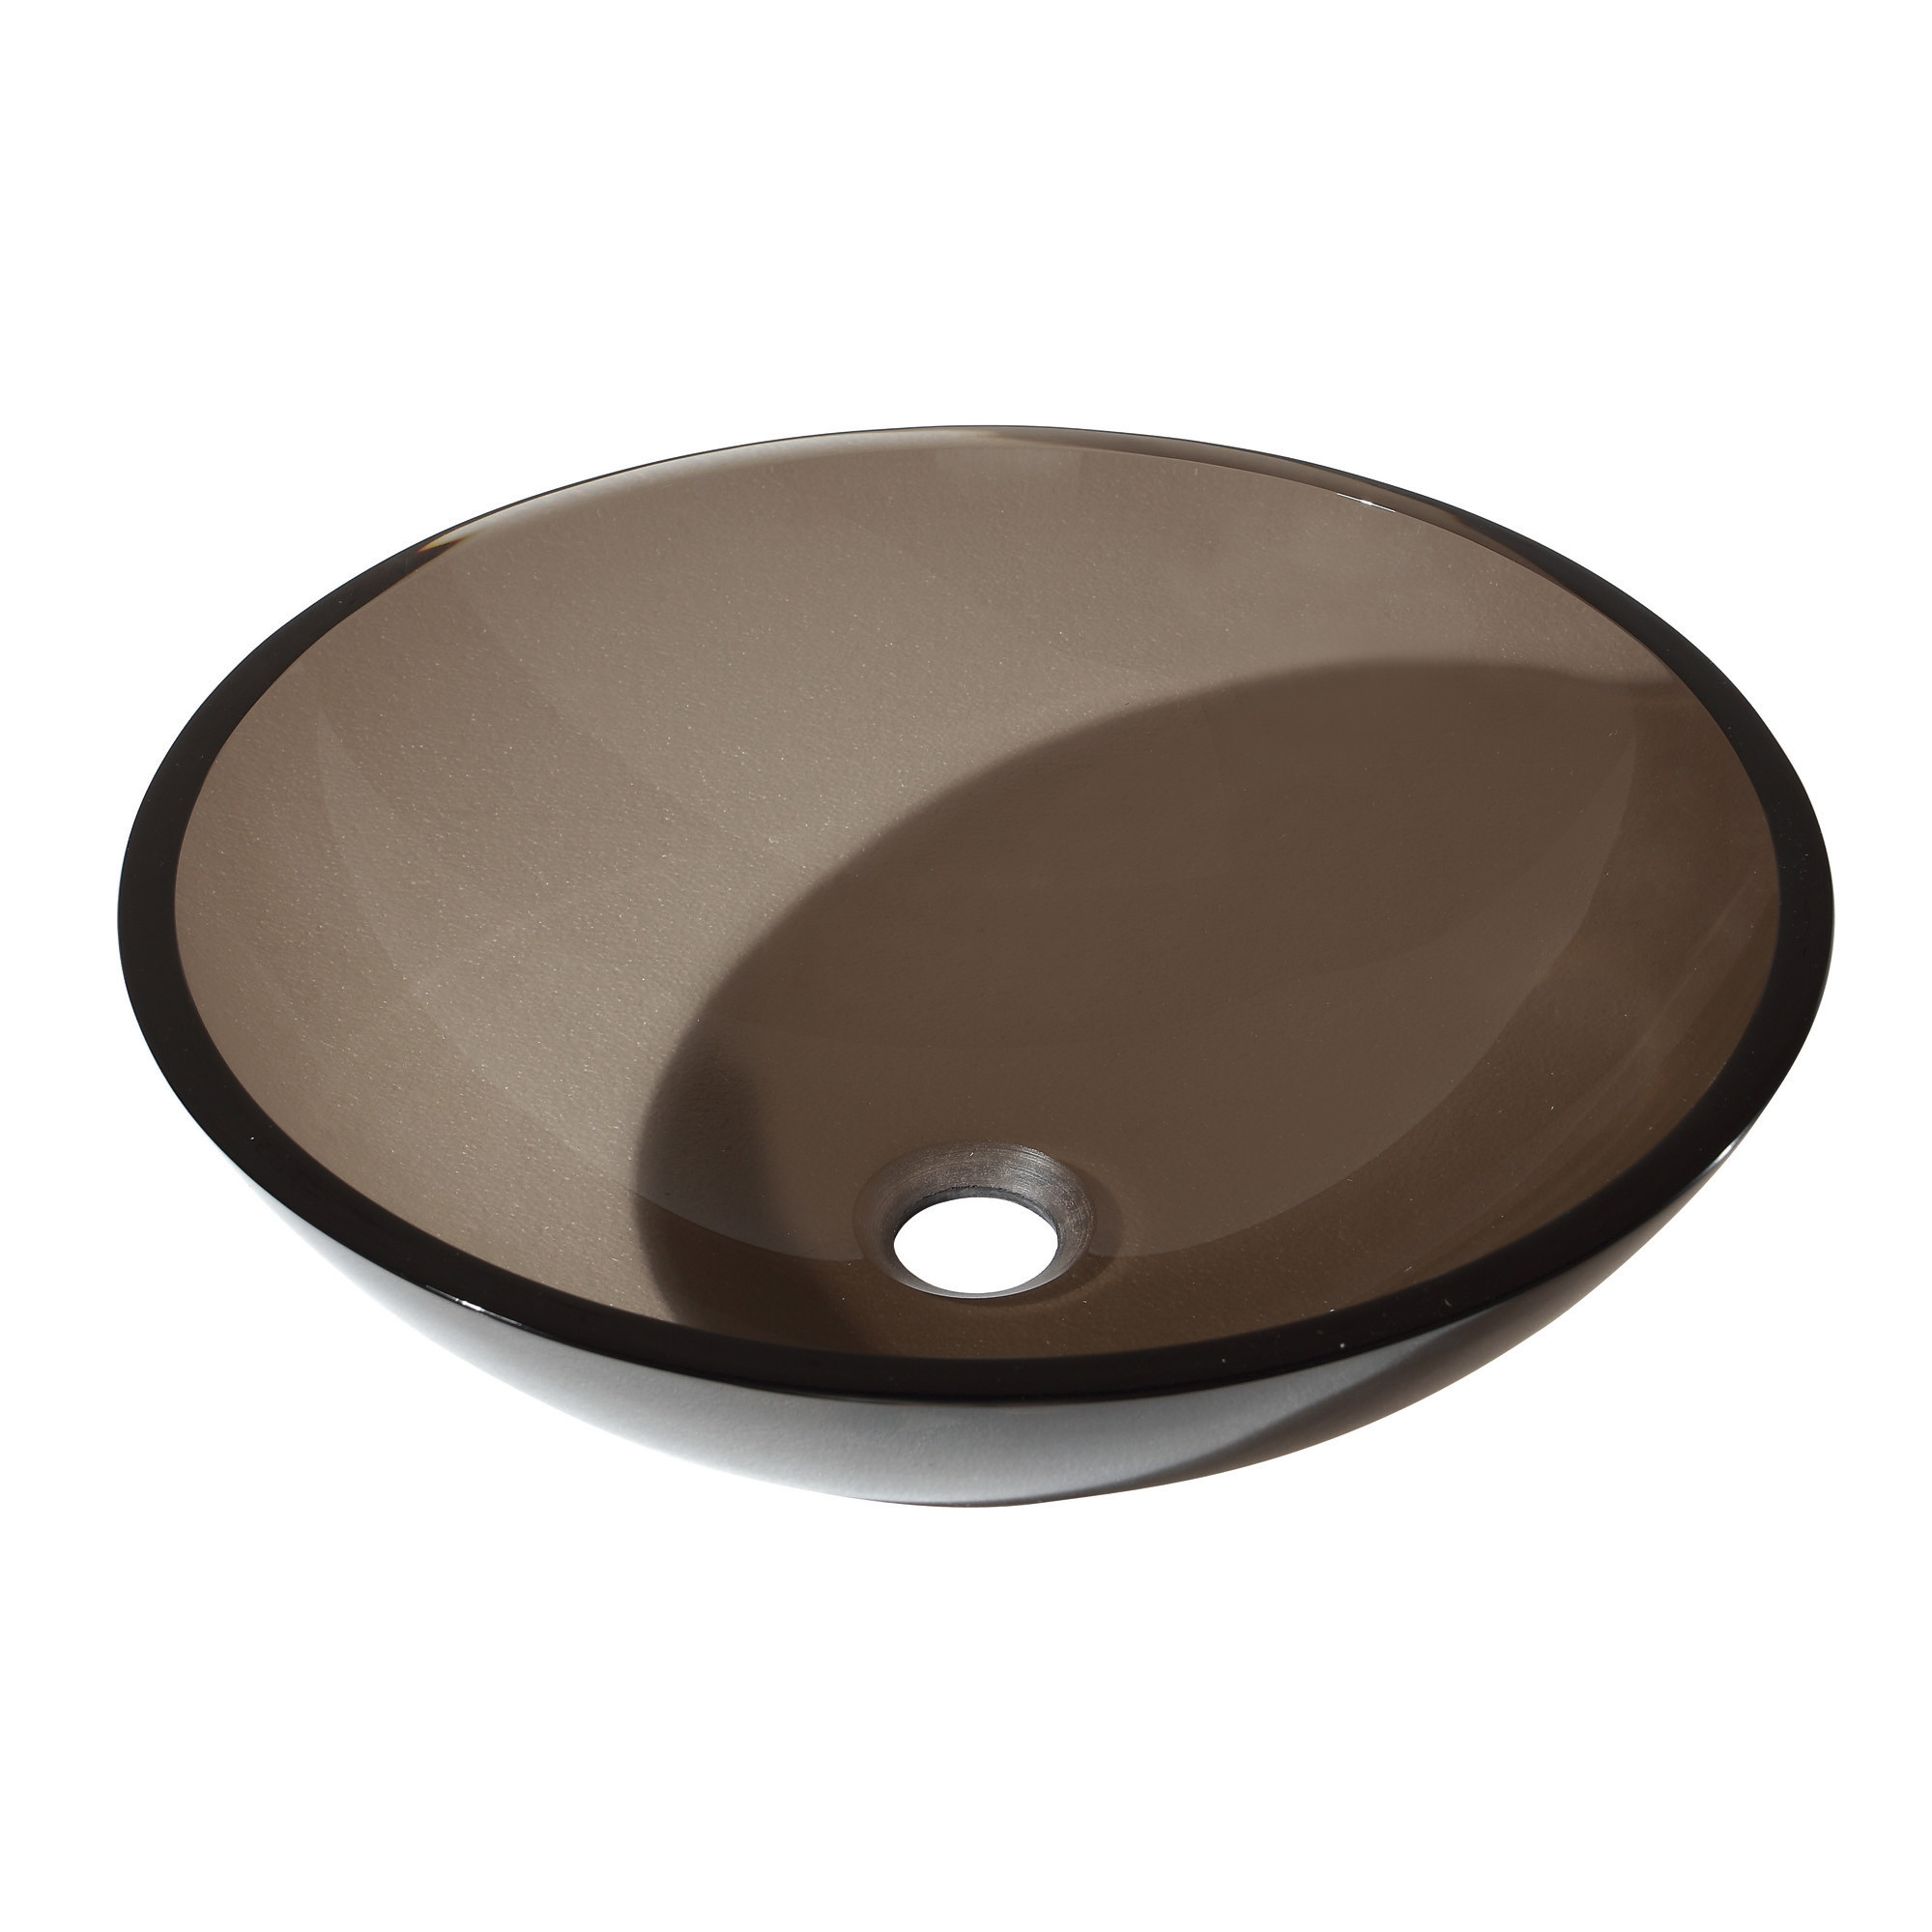 Details About Avanity Gve420 16 1 2 Round Tempered Glass Deck Mounted Vessel Sink Brown